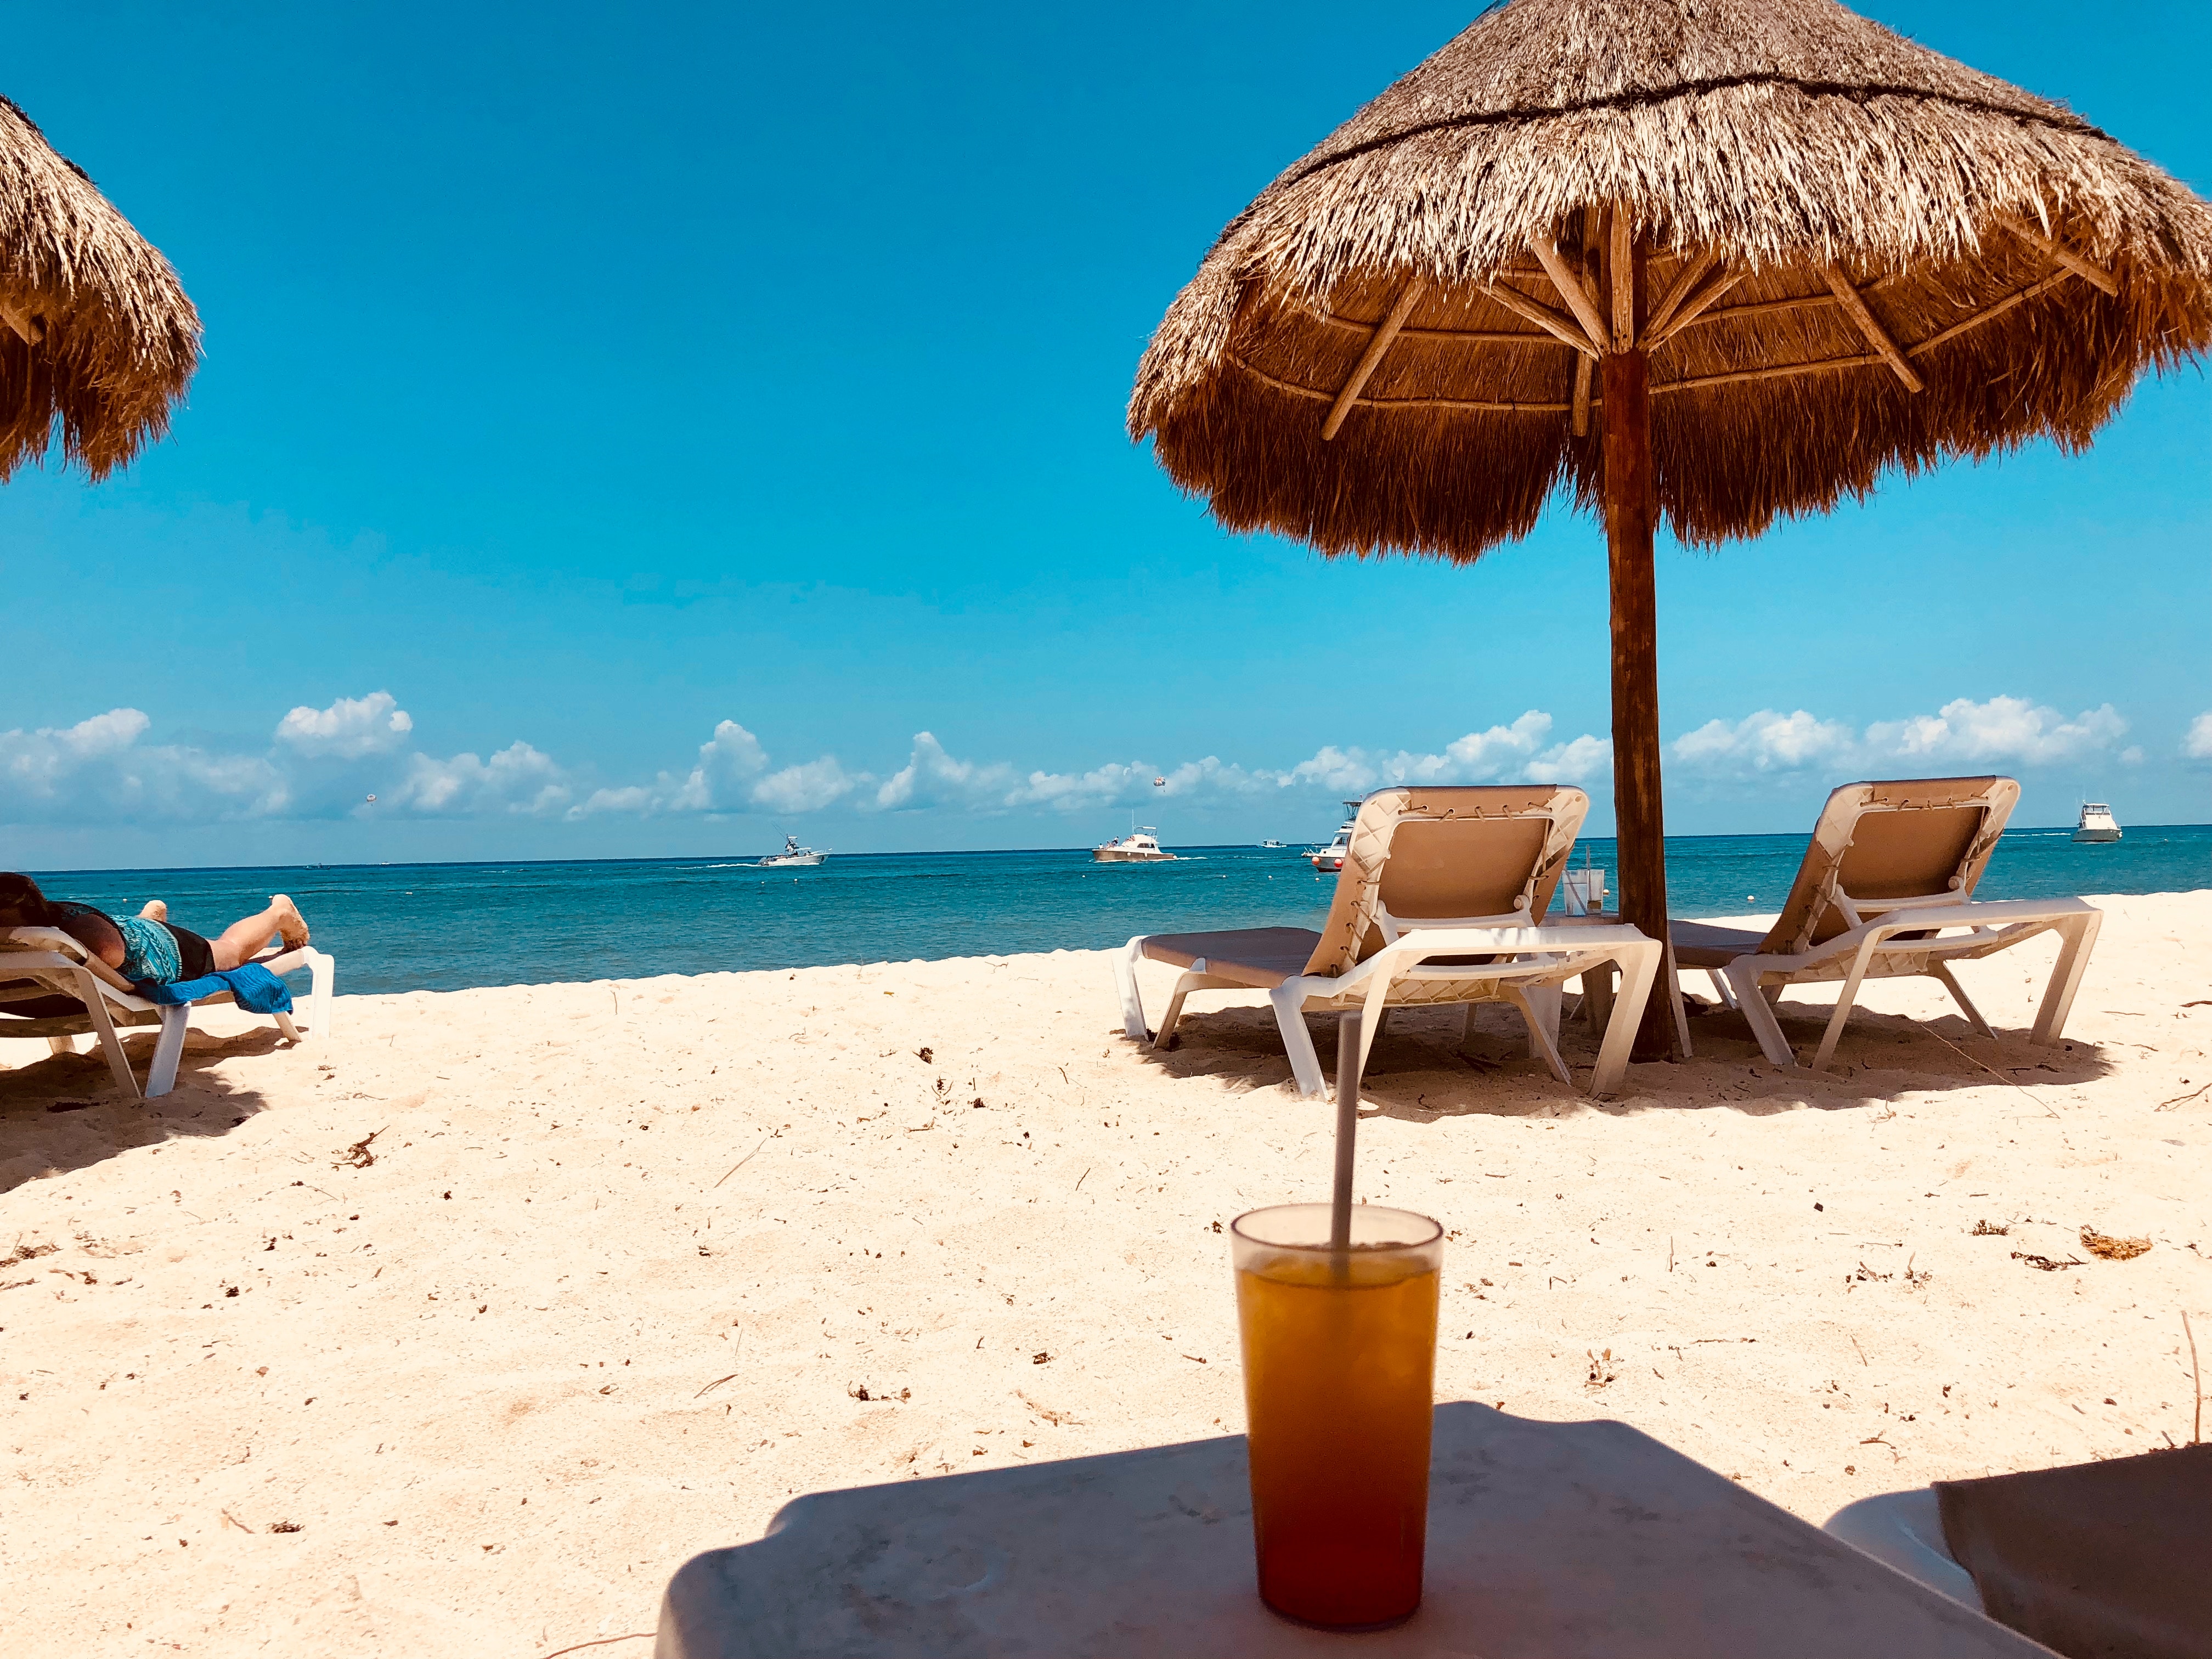 Why Would You Go To An All-Inclusive Resort If You Don’t Drink?